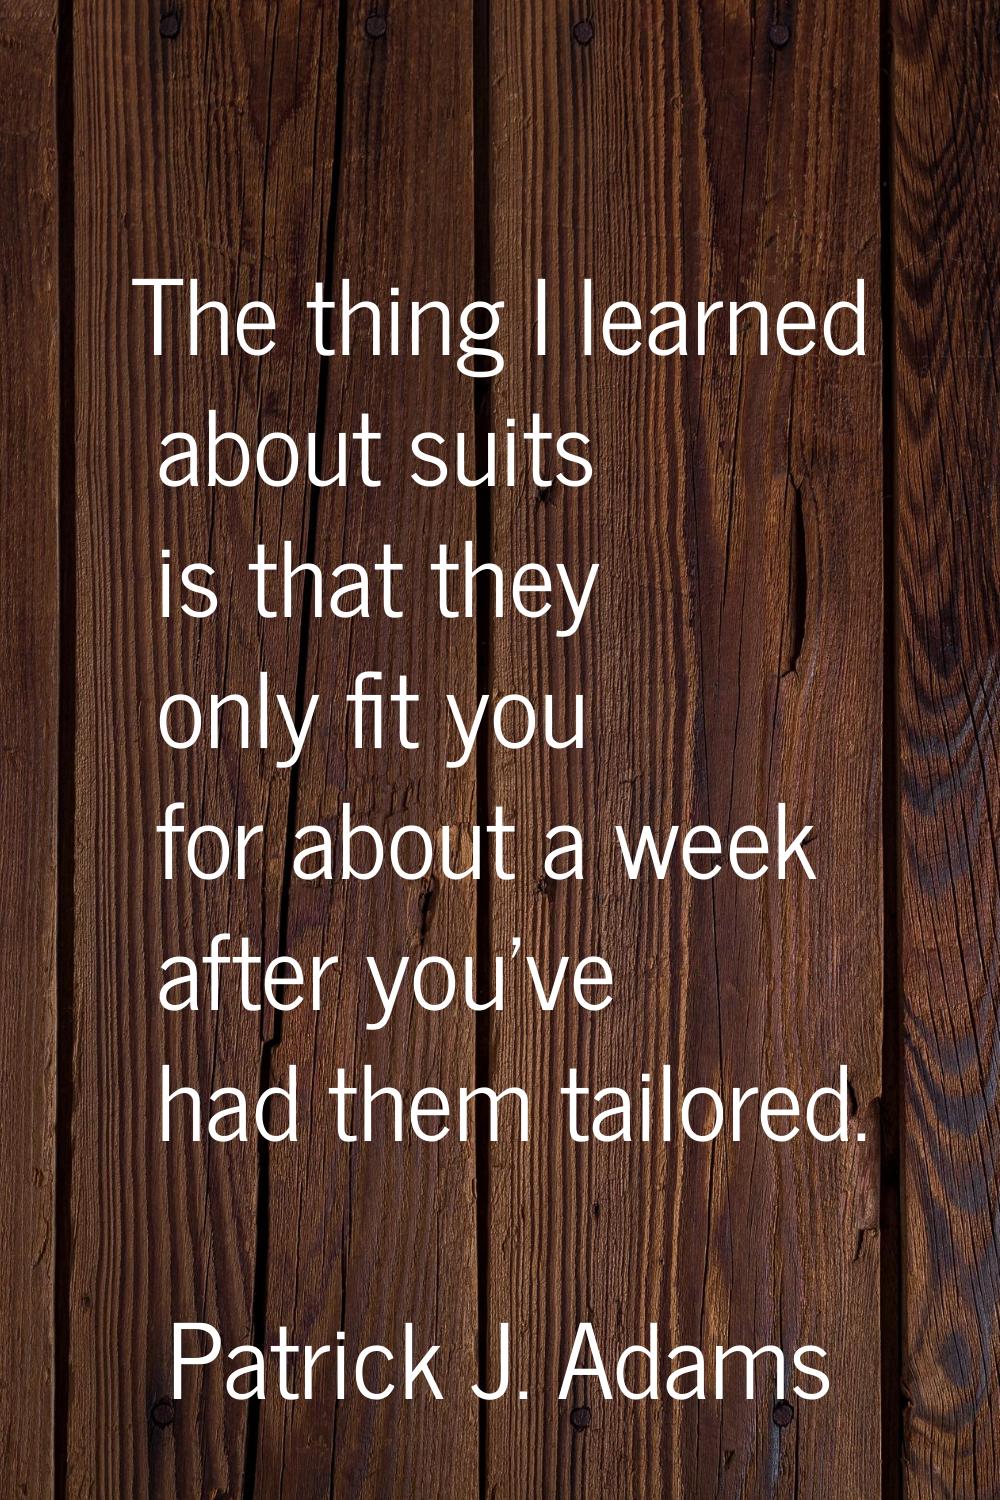 The thing I learned about suits is that they only fit you for about a week after you've had them ta